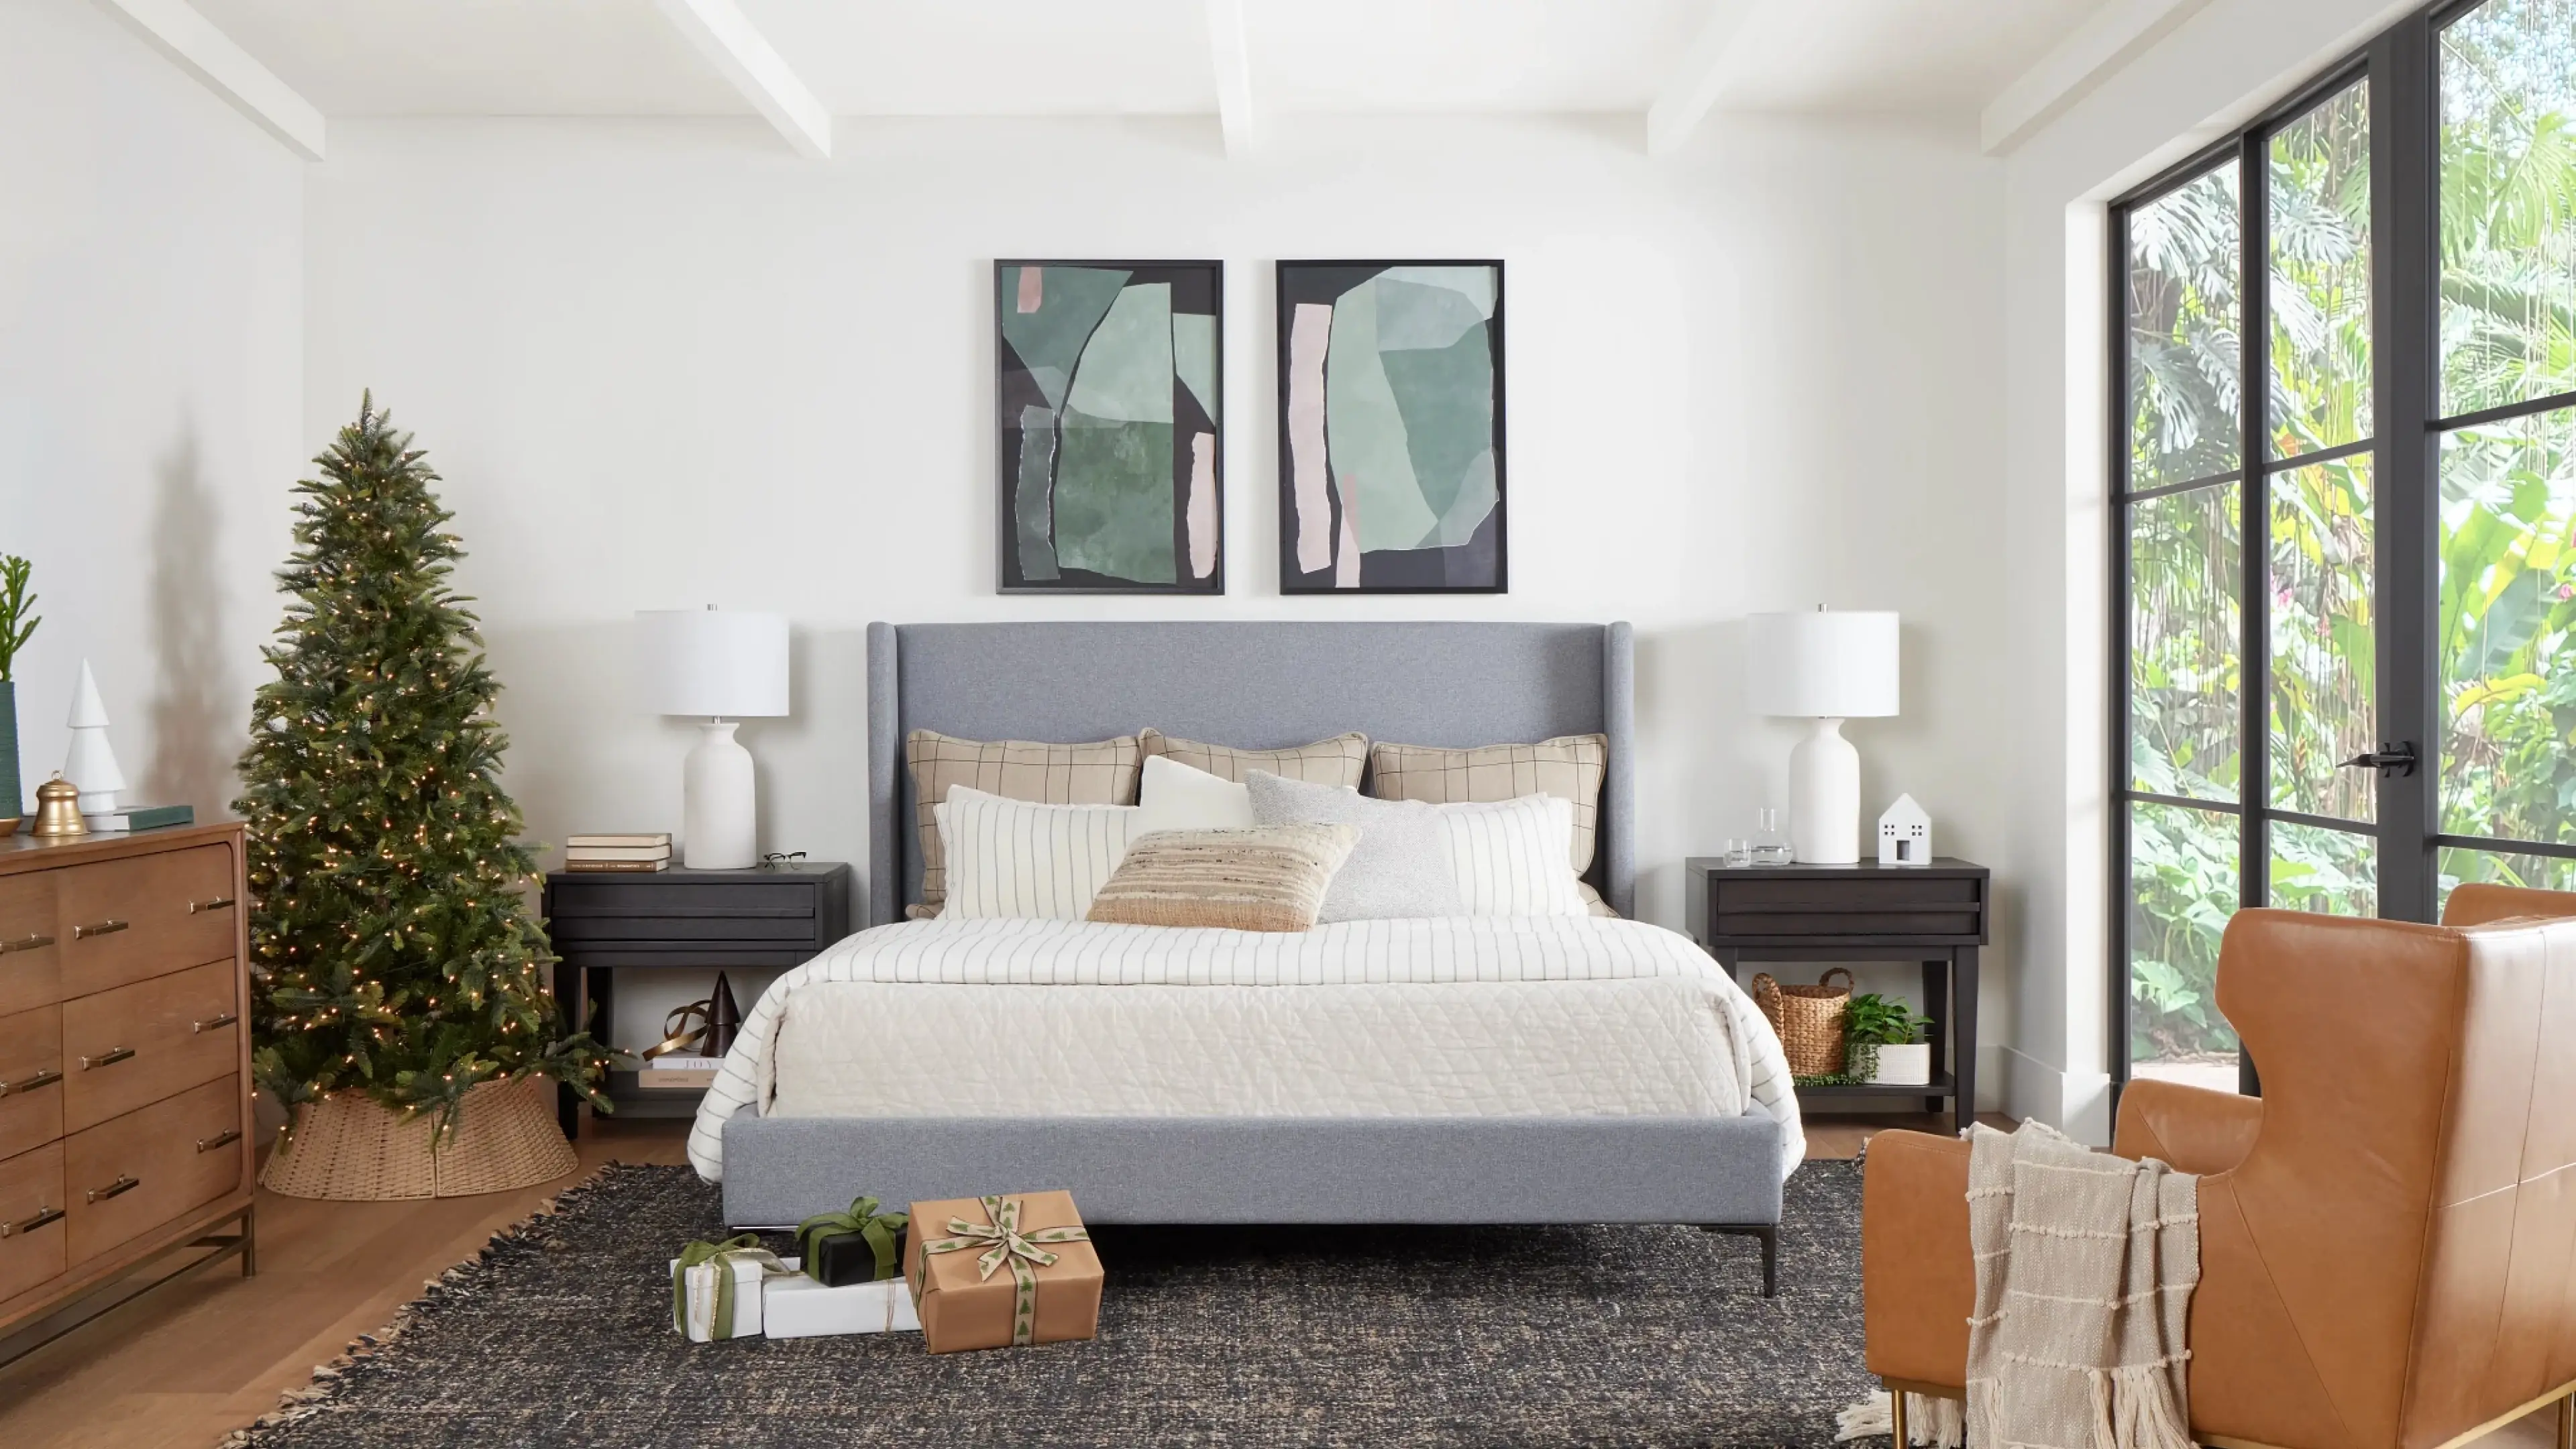 <h2><span style="color:#ffffff;"><span class="g-header u-font-size--36px">Dreamy essentials for the coziest</span></span></h2>

<h2><span style="color:#ffffff;"><span class="g-header u-font-size--36px">time of year.</span></span></h2>
